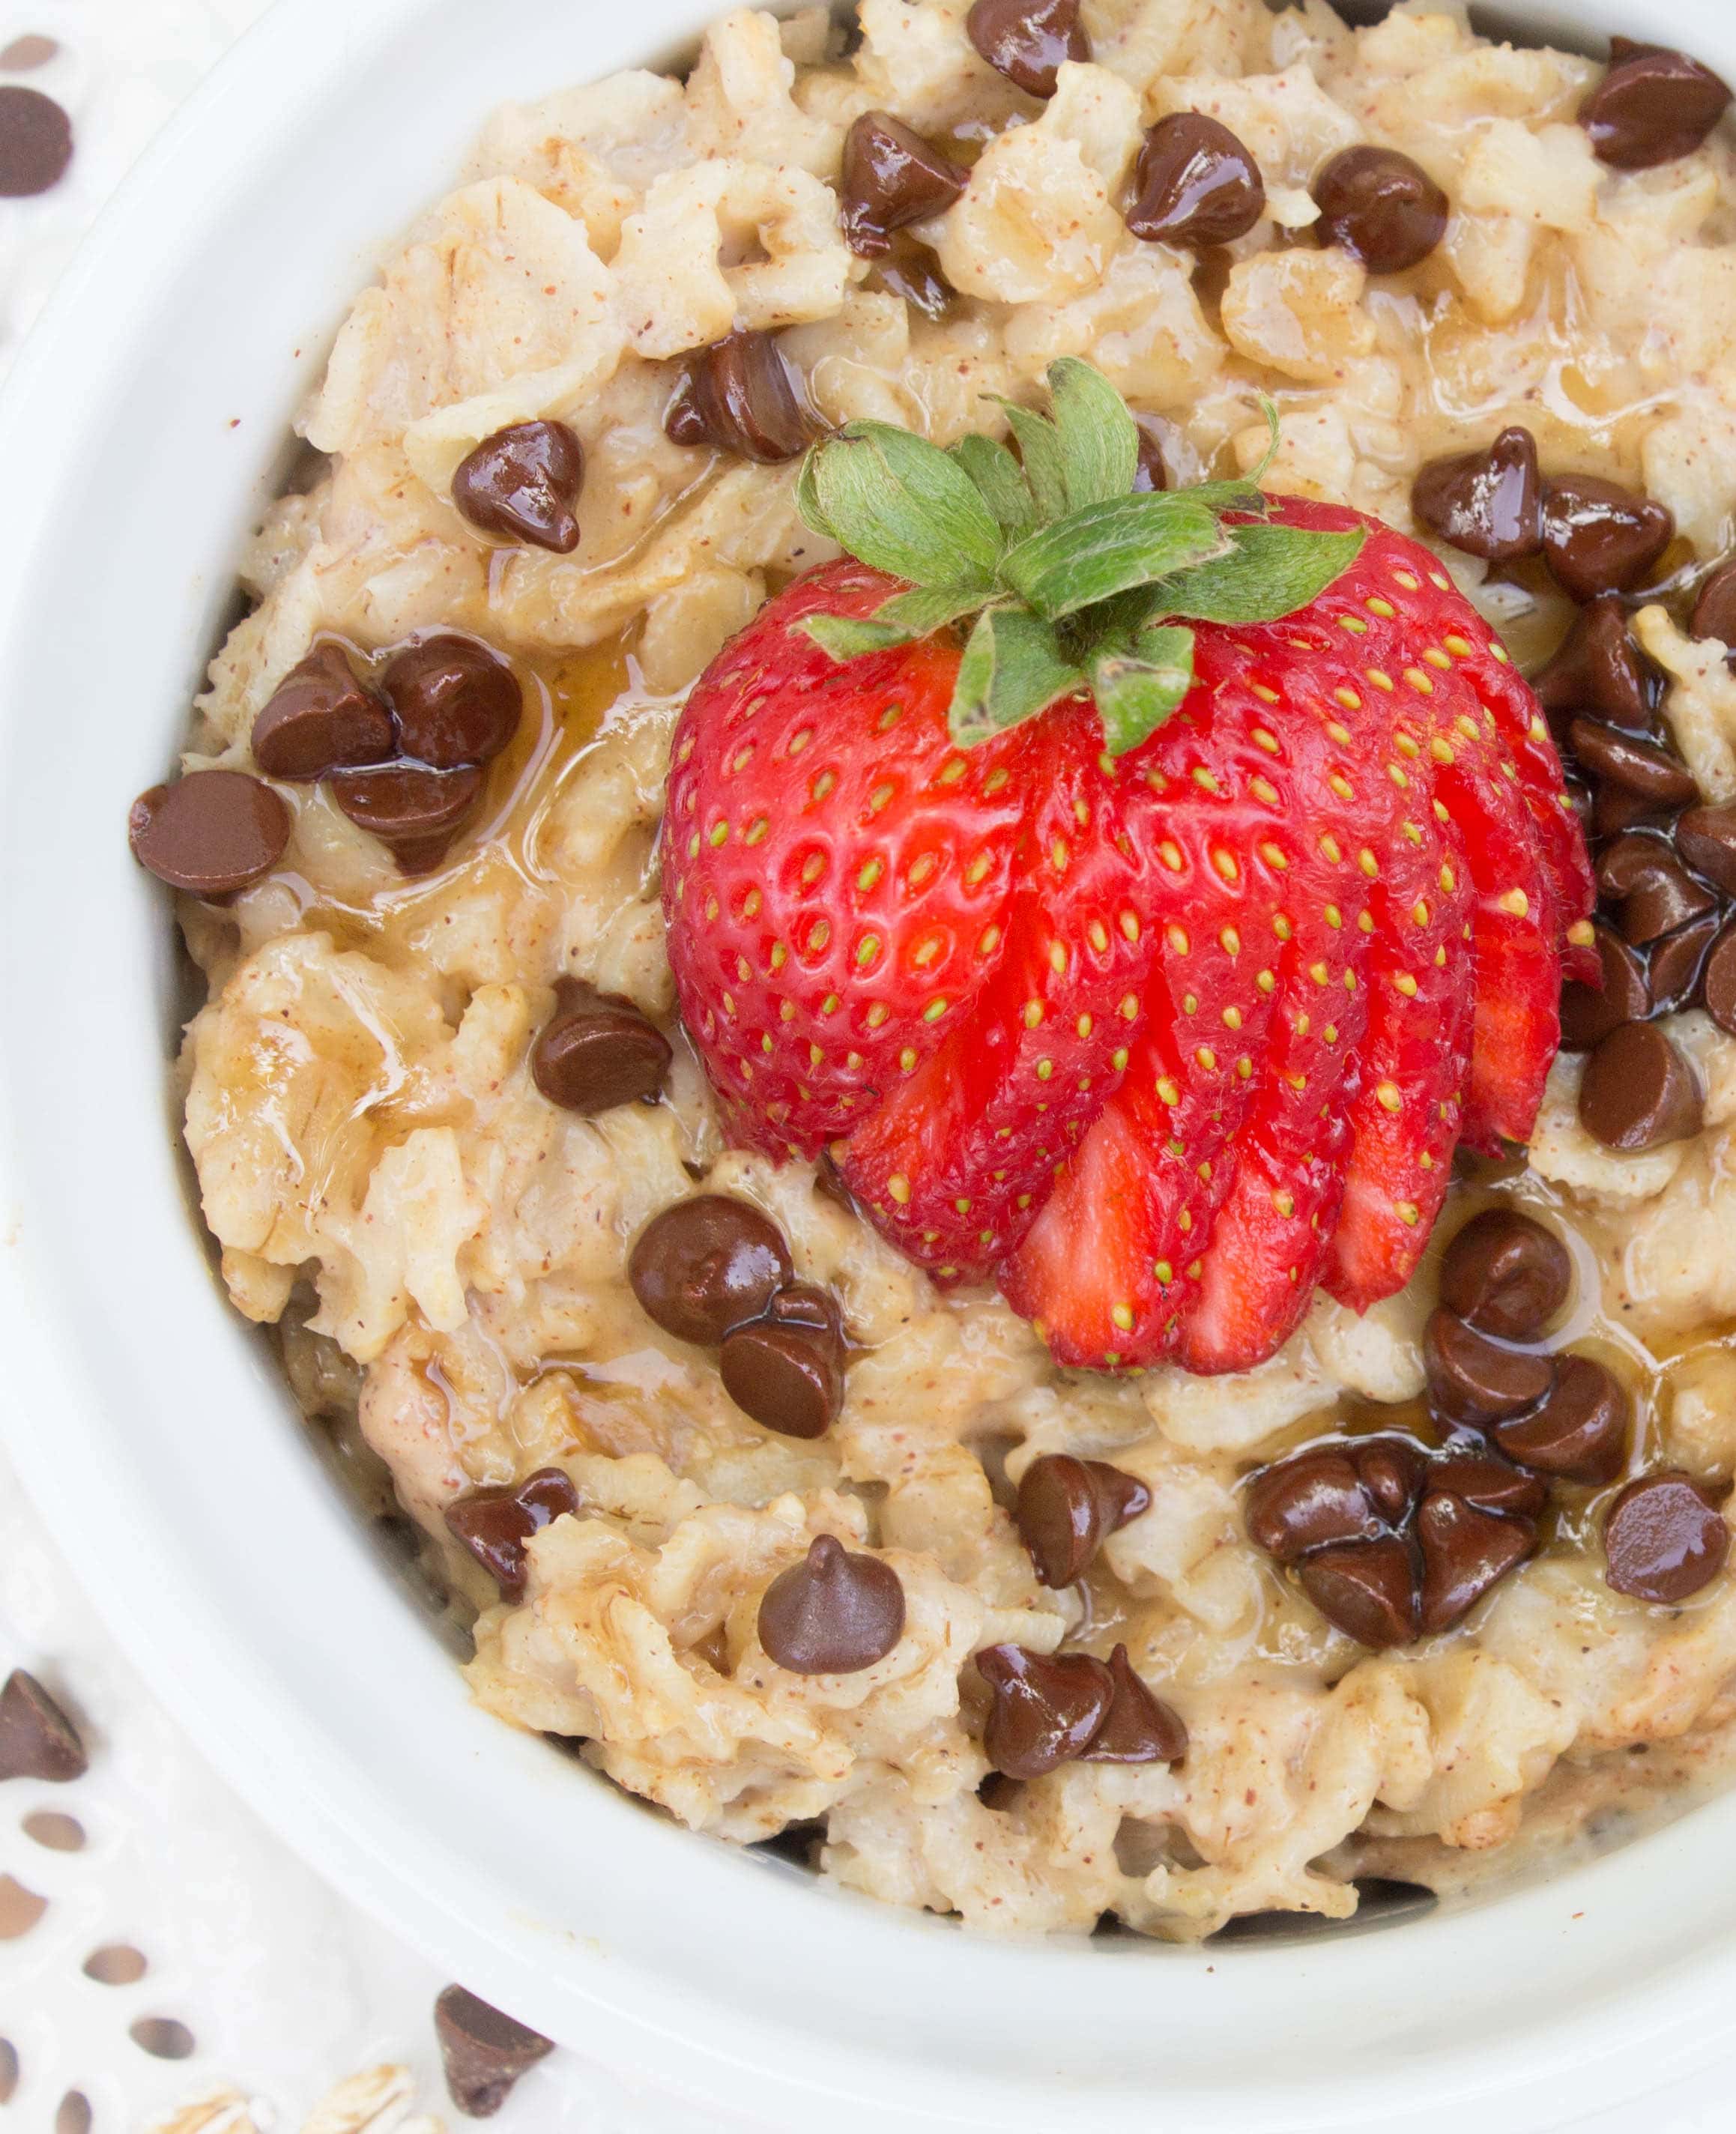 Strawberry Chocolate Chip Oatmeal from Kathryn's Kitchen Blog